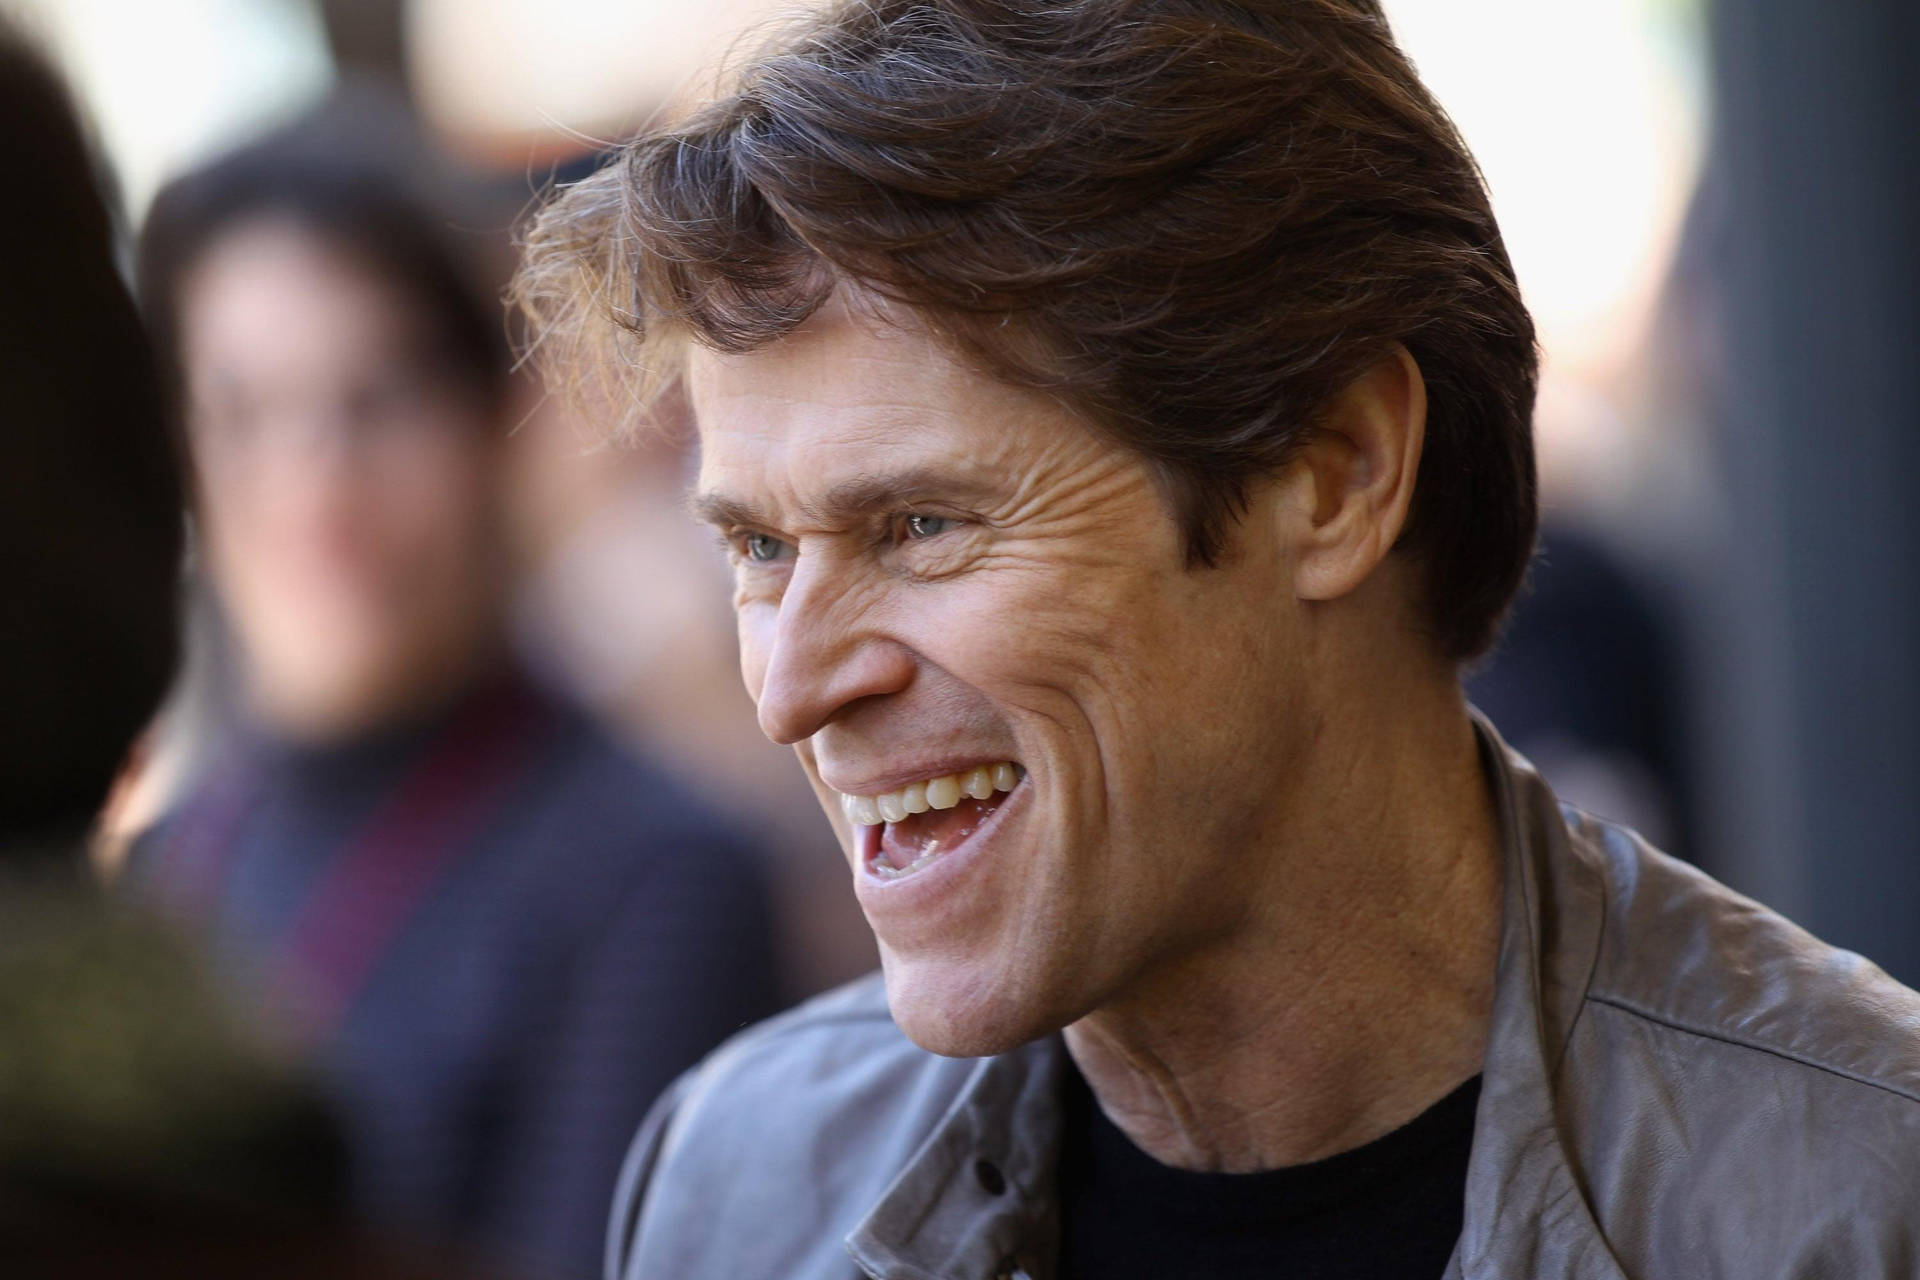 Award-winning Actor Willem Dafoe In A Captivating Side Profile View.